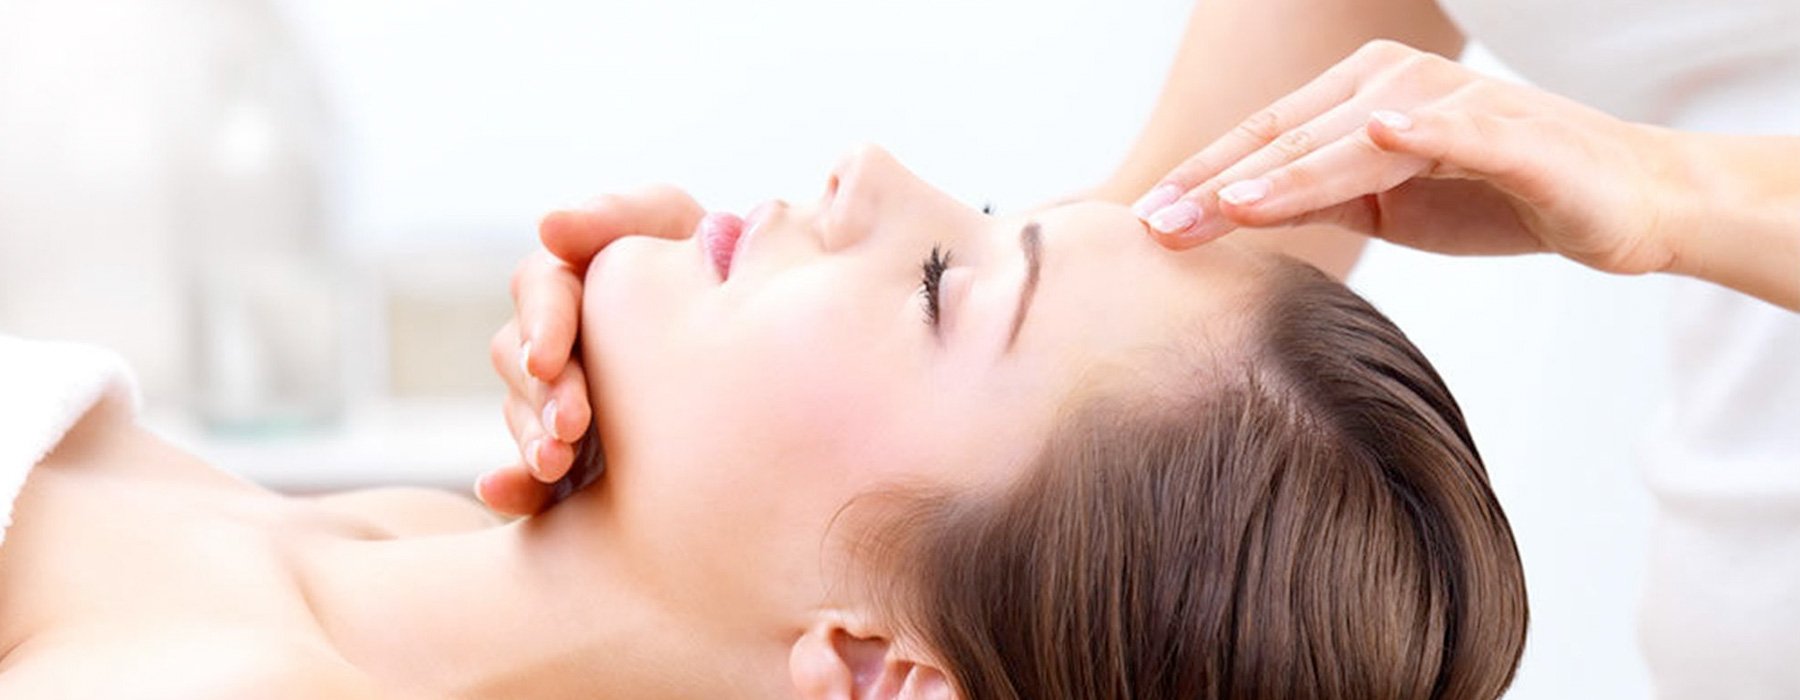 Skincare Treatments from Lir Beauty Rooms